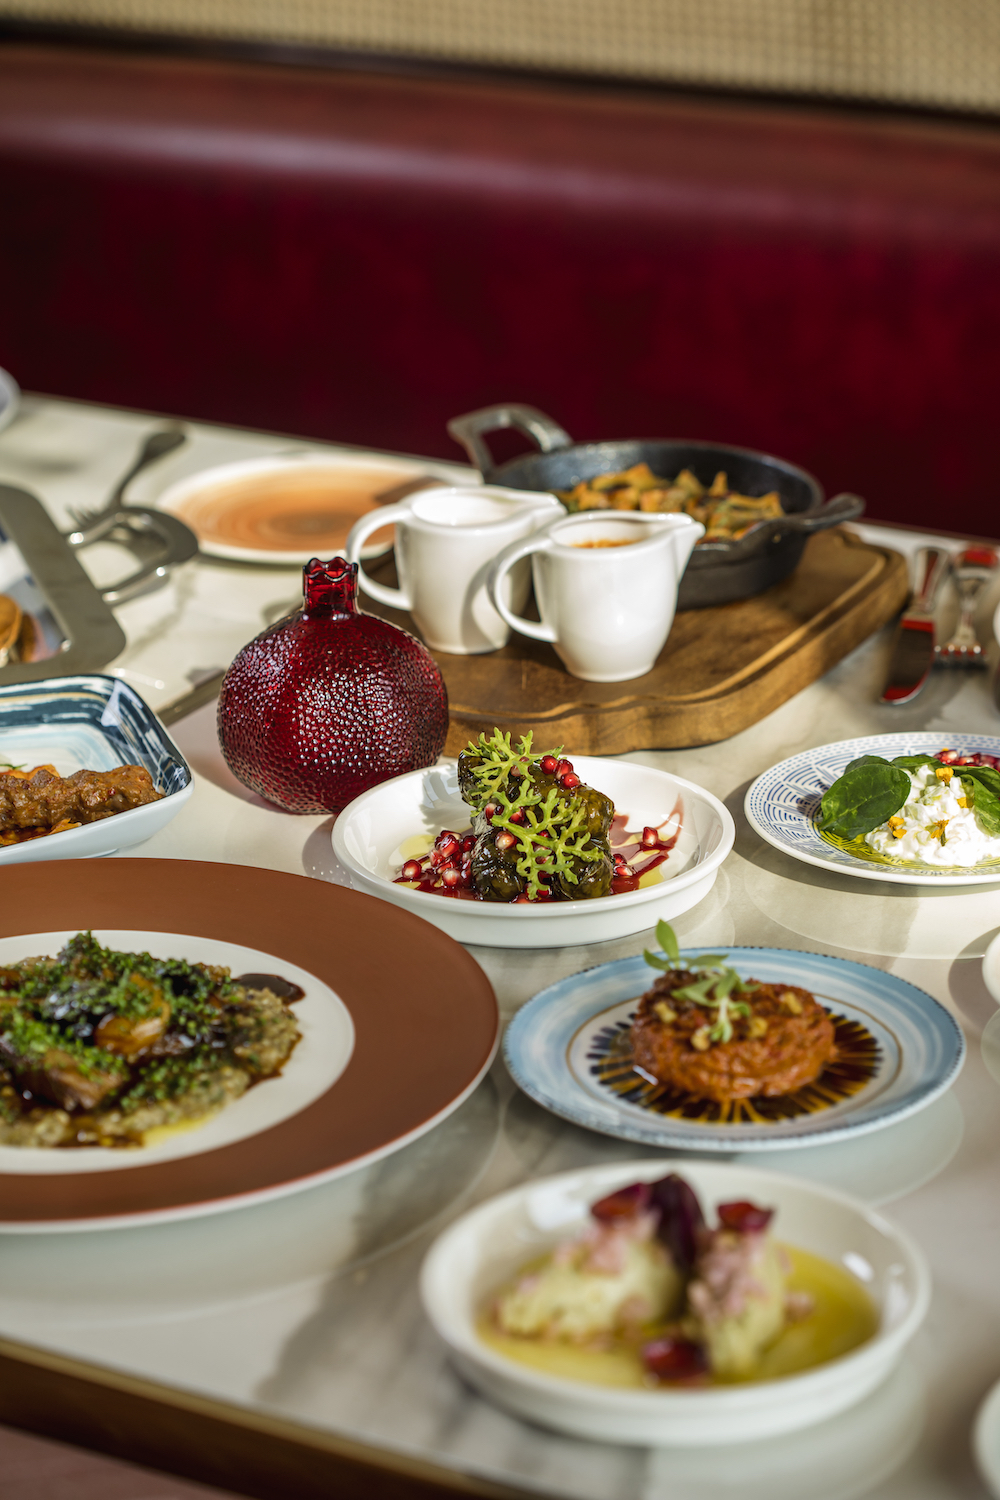 More Cravings by Marriott Bonvoy™ Continues to Grow with New Dining Venues in Qatar